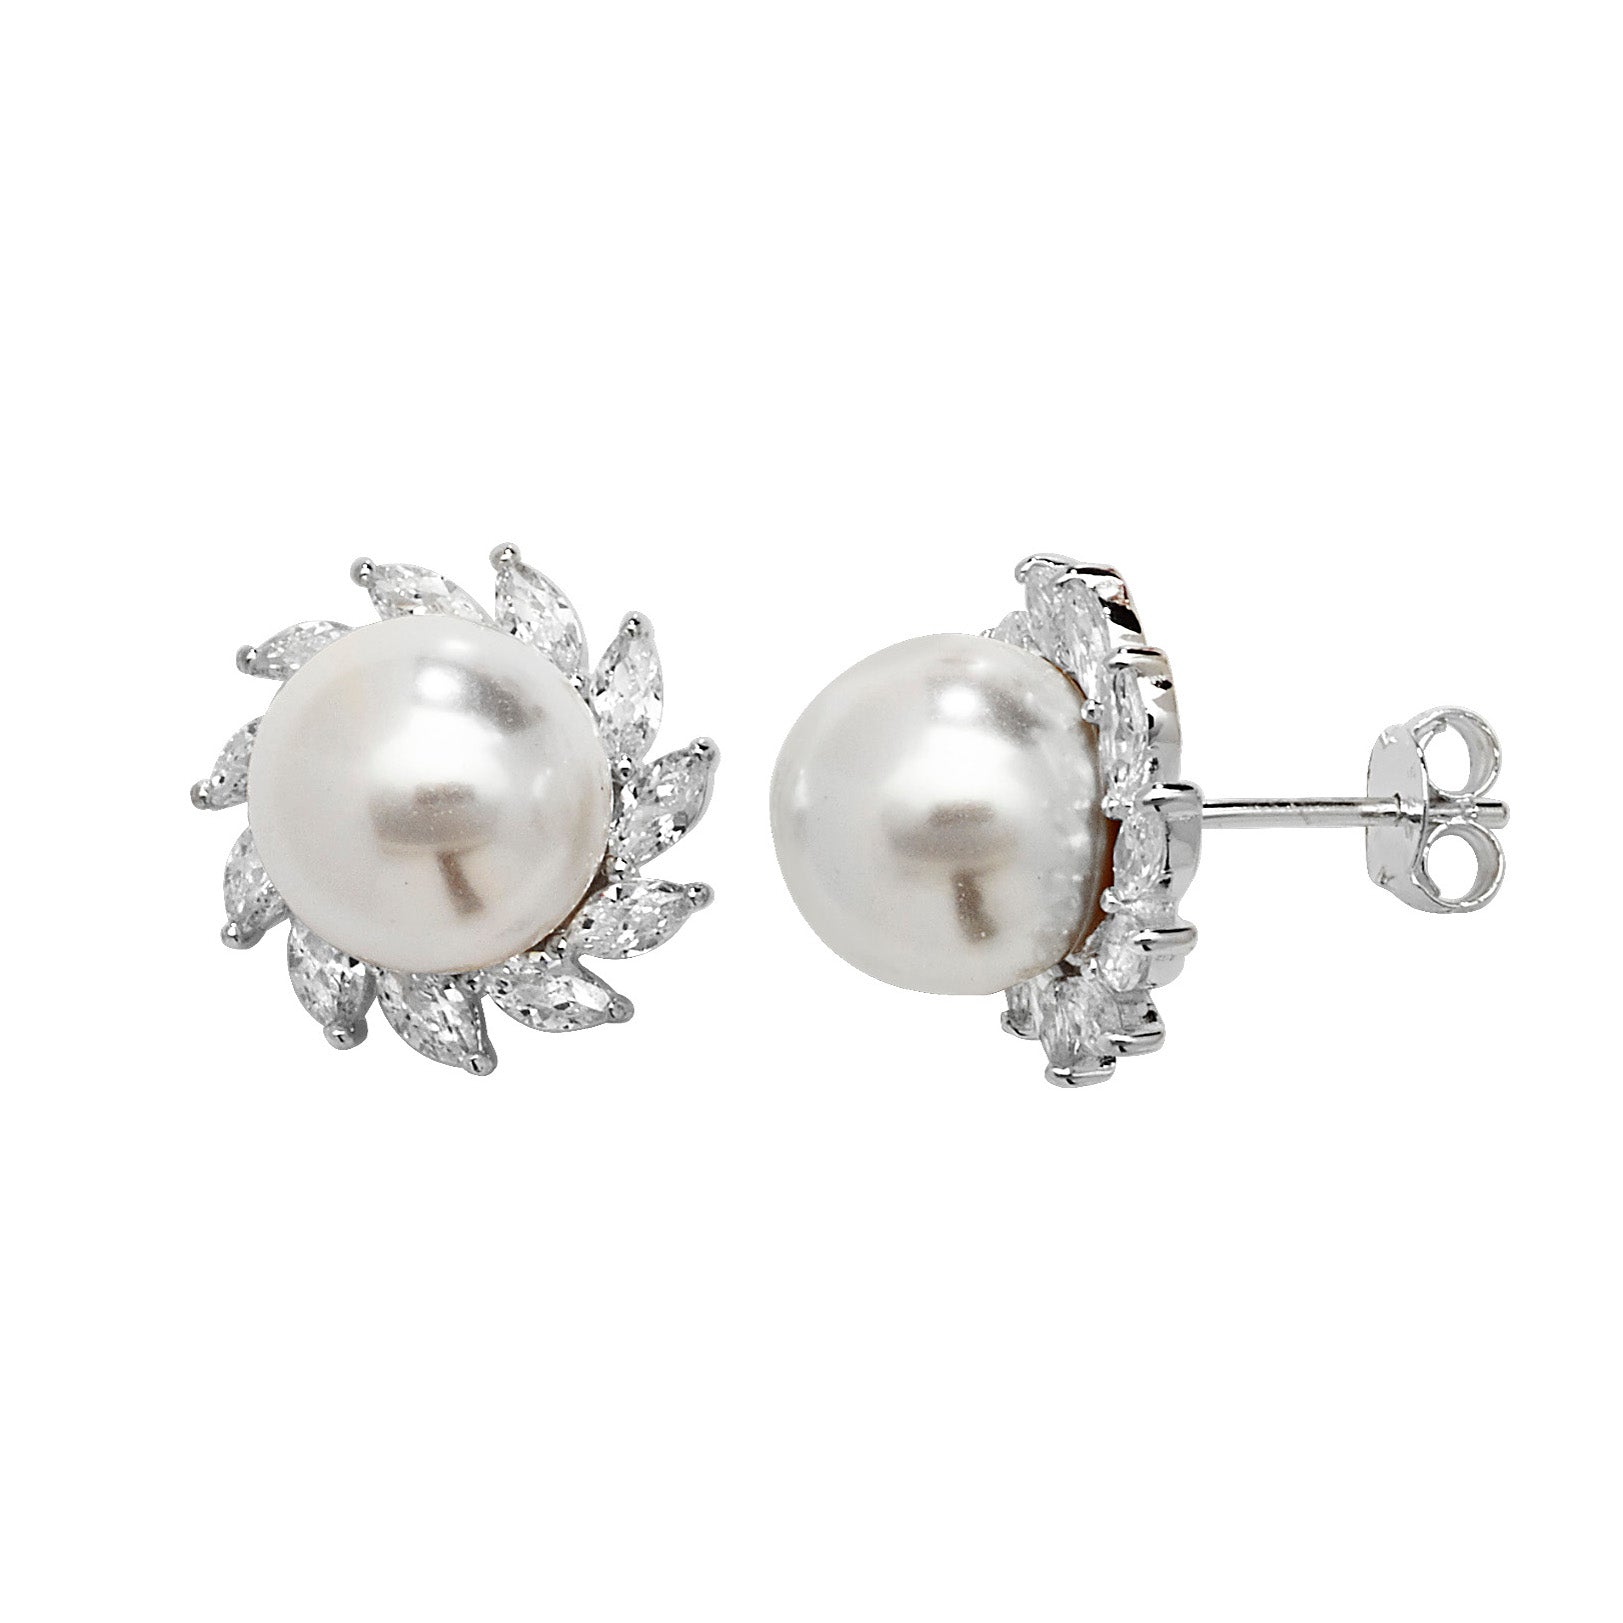 Silver CZ Simulated Pearl Stud Earrings 925 silver set with marquis cut CZs and a single pearl in each stud earring. Butterfly backs Synthetic pearls 15mm diameter